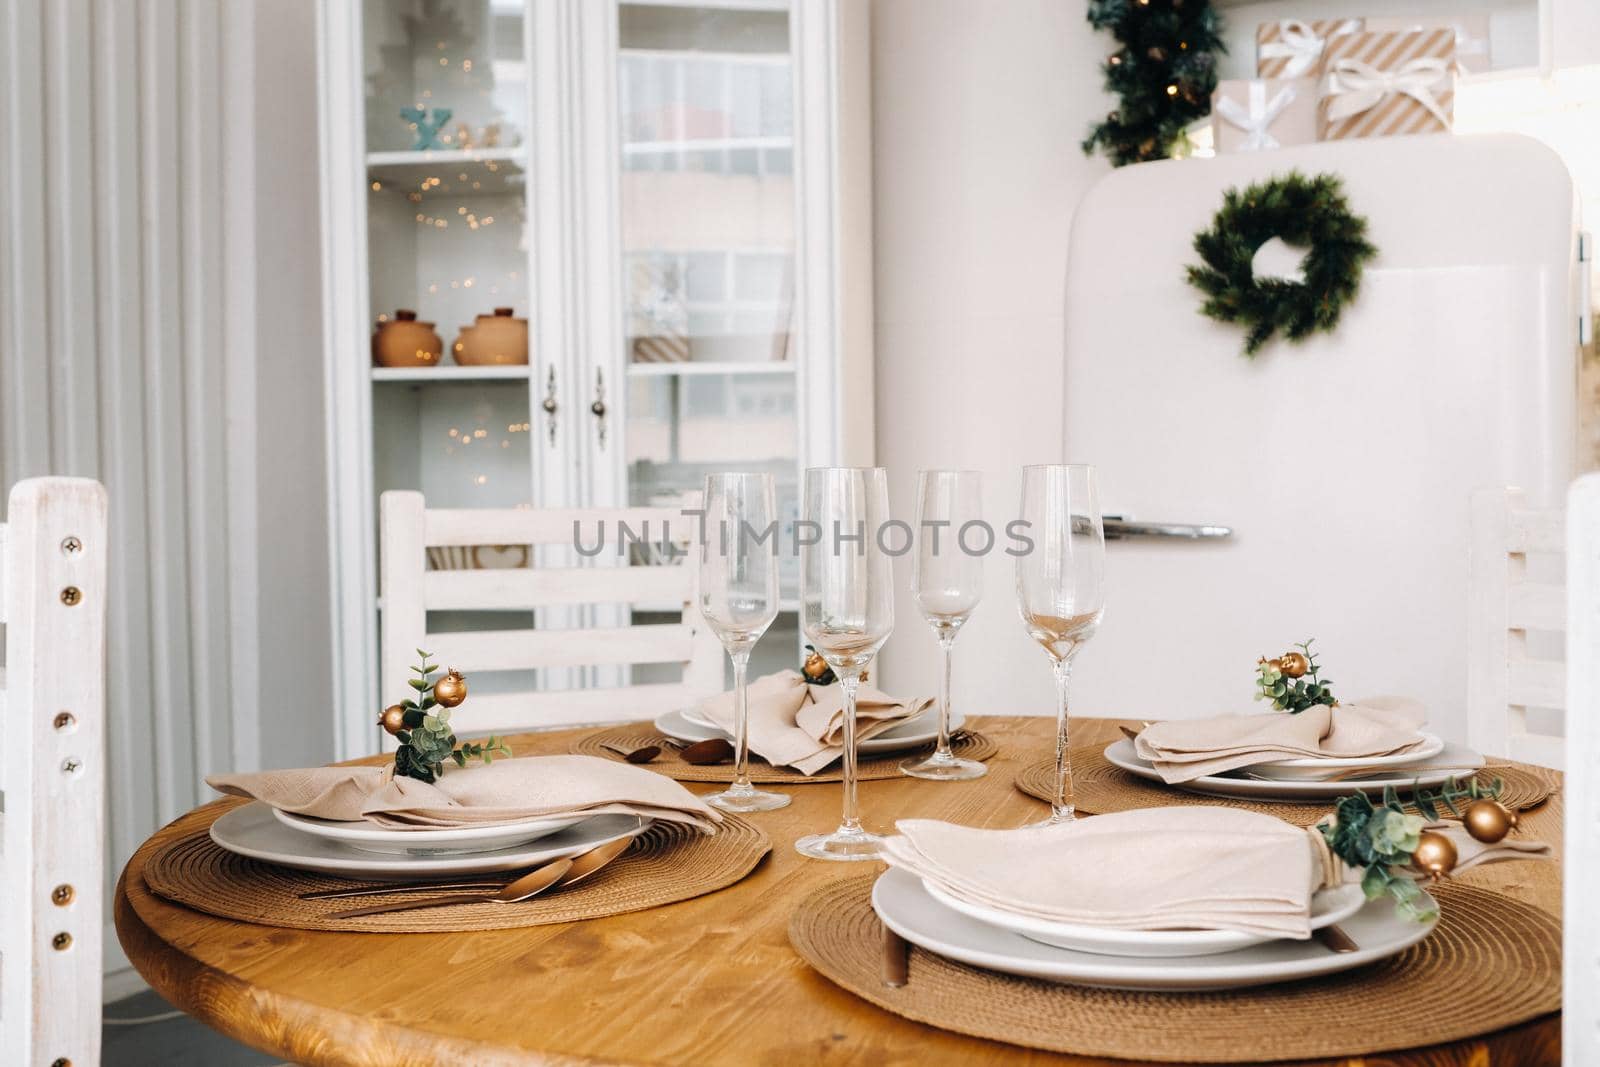 Christmas table decoration in the kitchen, Banquet table with glasses before serving food, close-up of the Christmas dinner table with seasonal decorations, crystal glasses and decorative deer by Lobachad